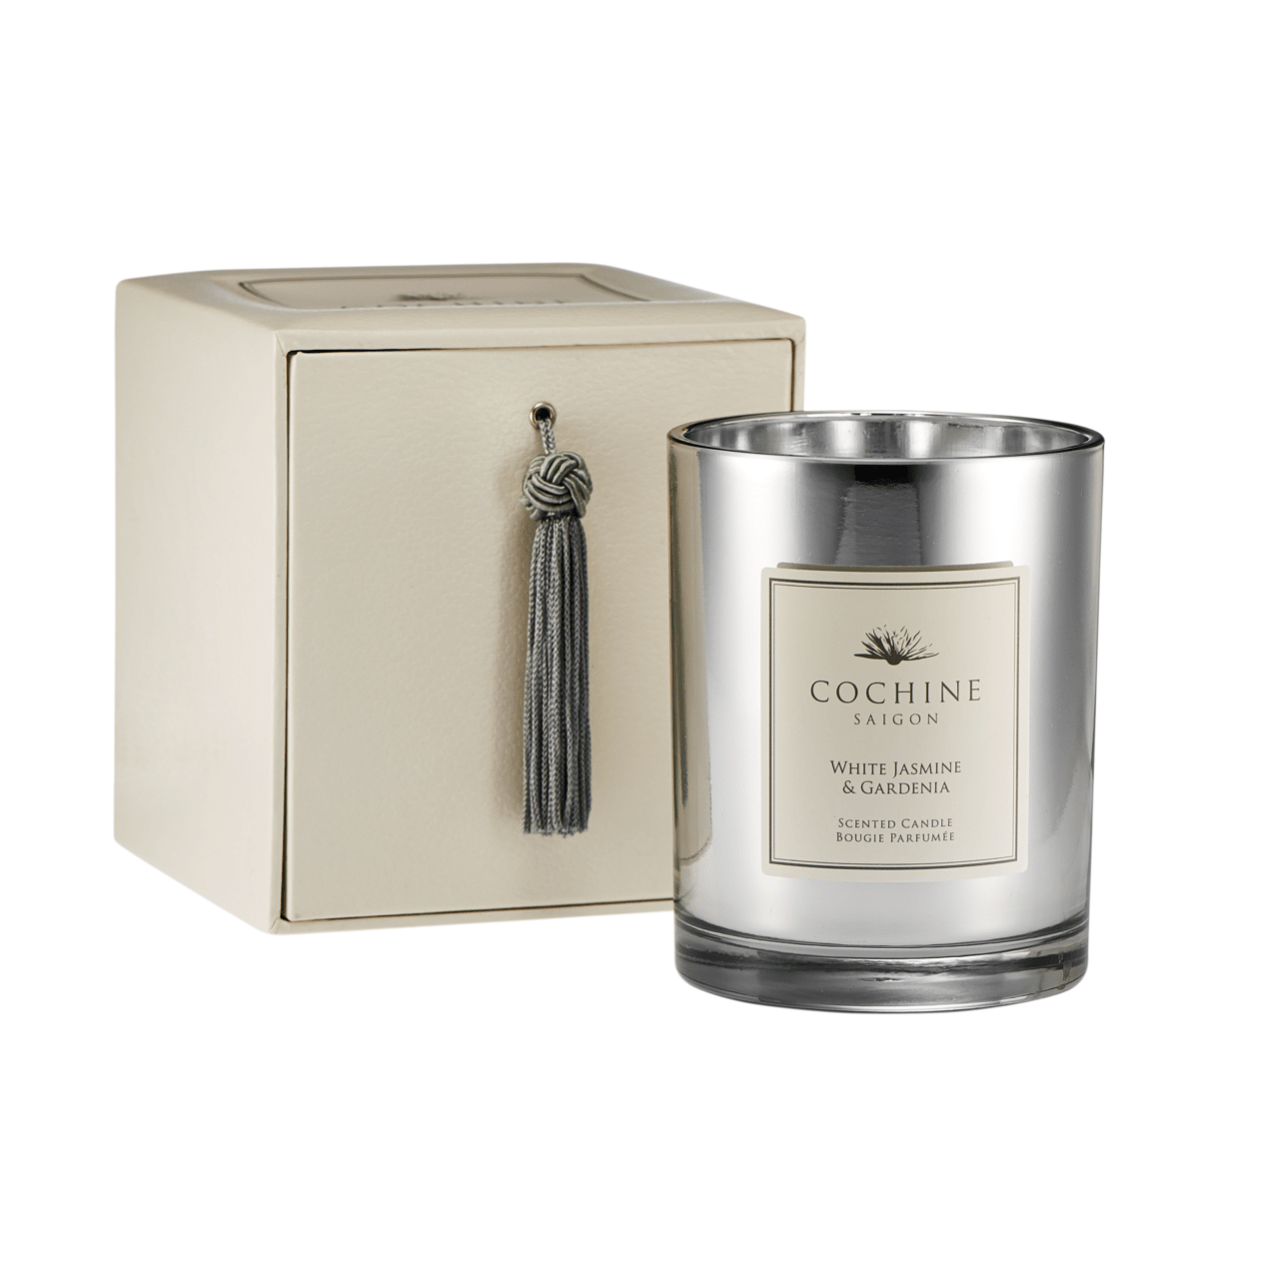 Cochine Home Fragrances of Cochines luxury scented candles and Cochine reed diffuers in Cochine White Jasmine & Gardenia Candle